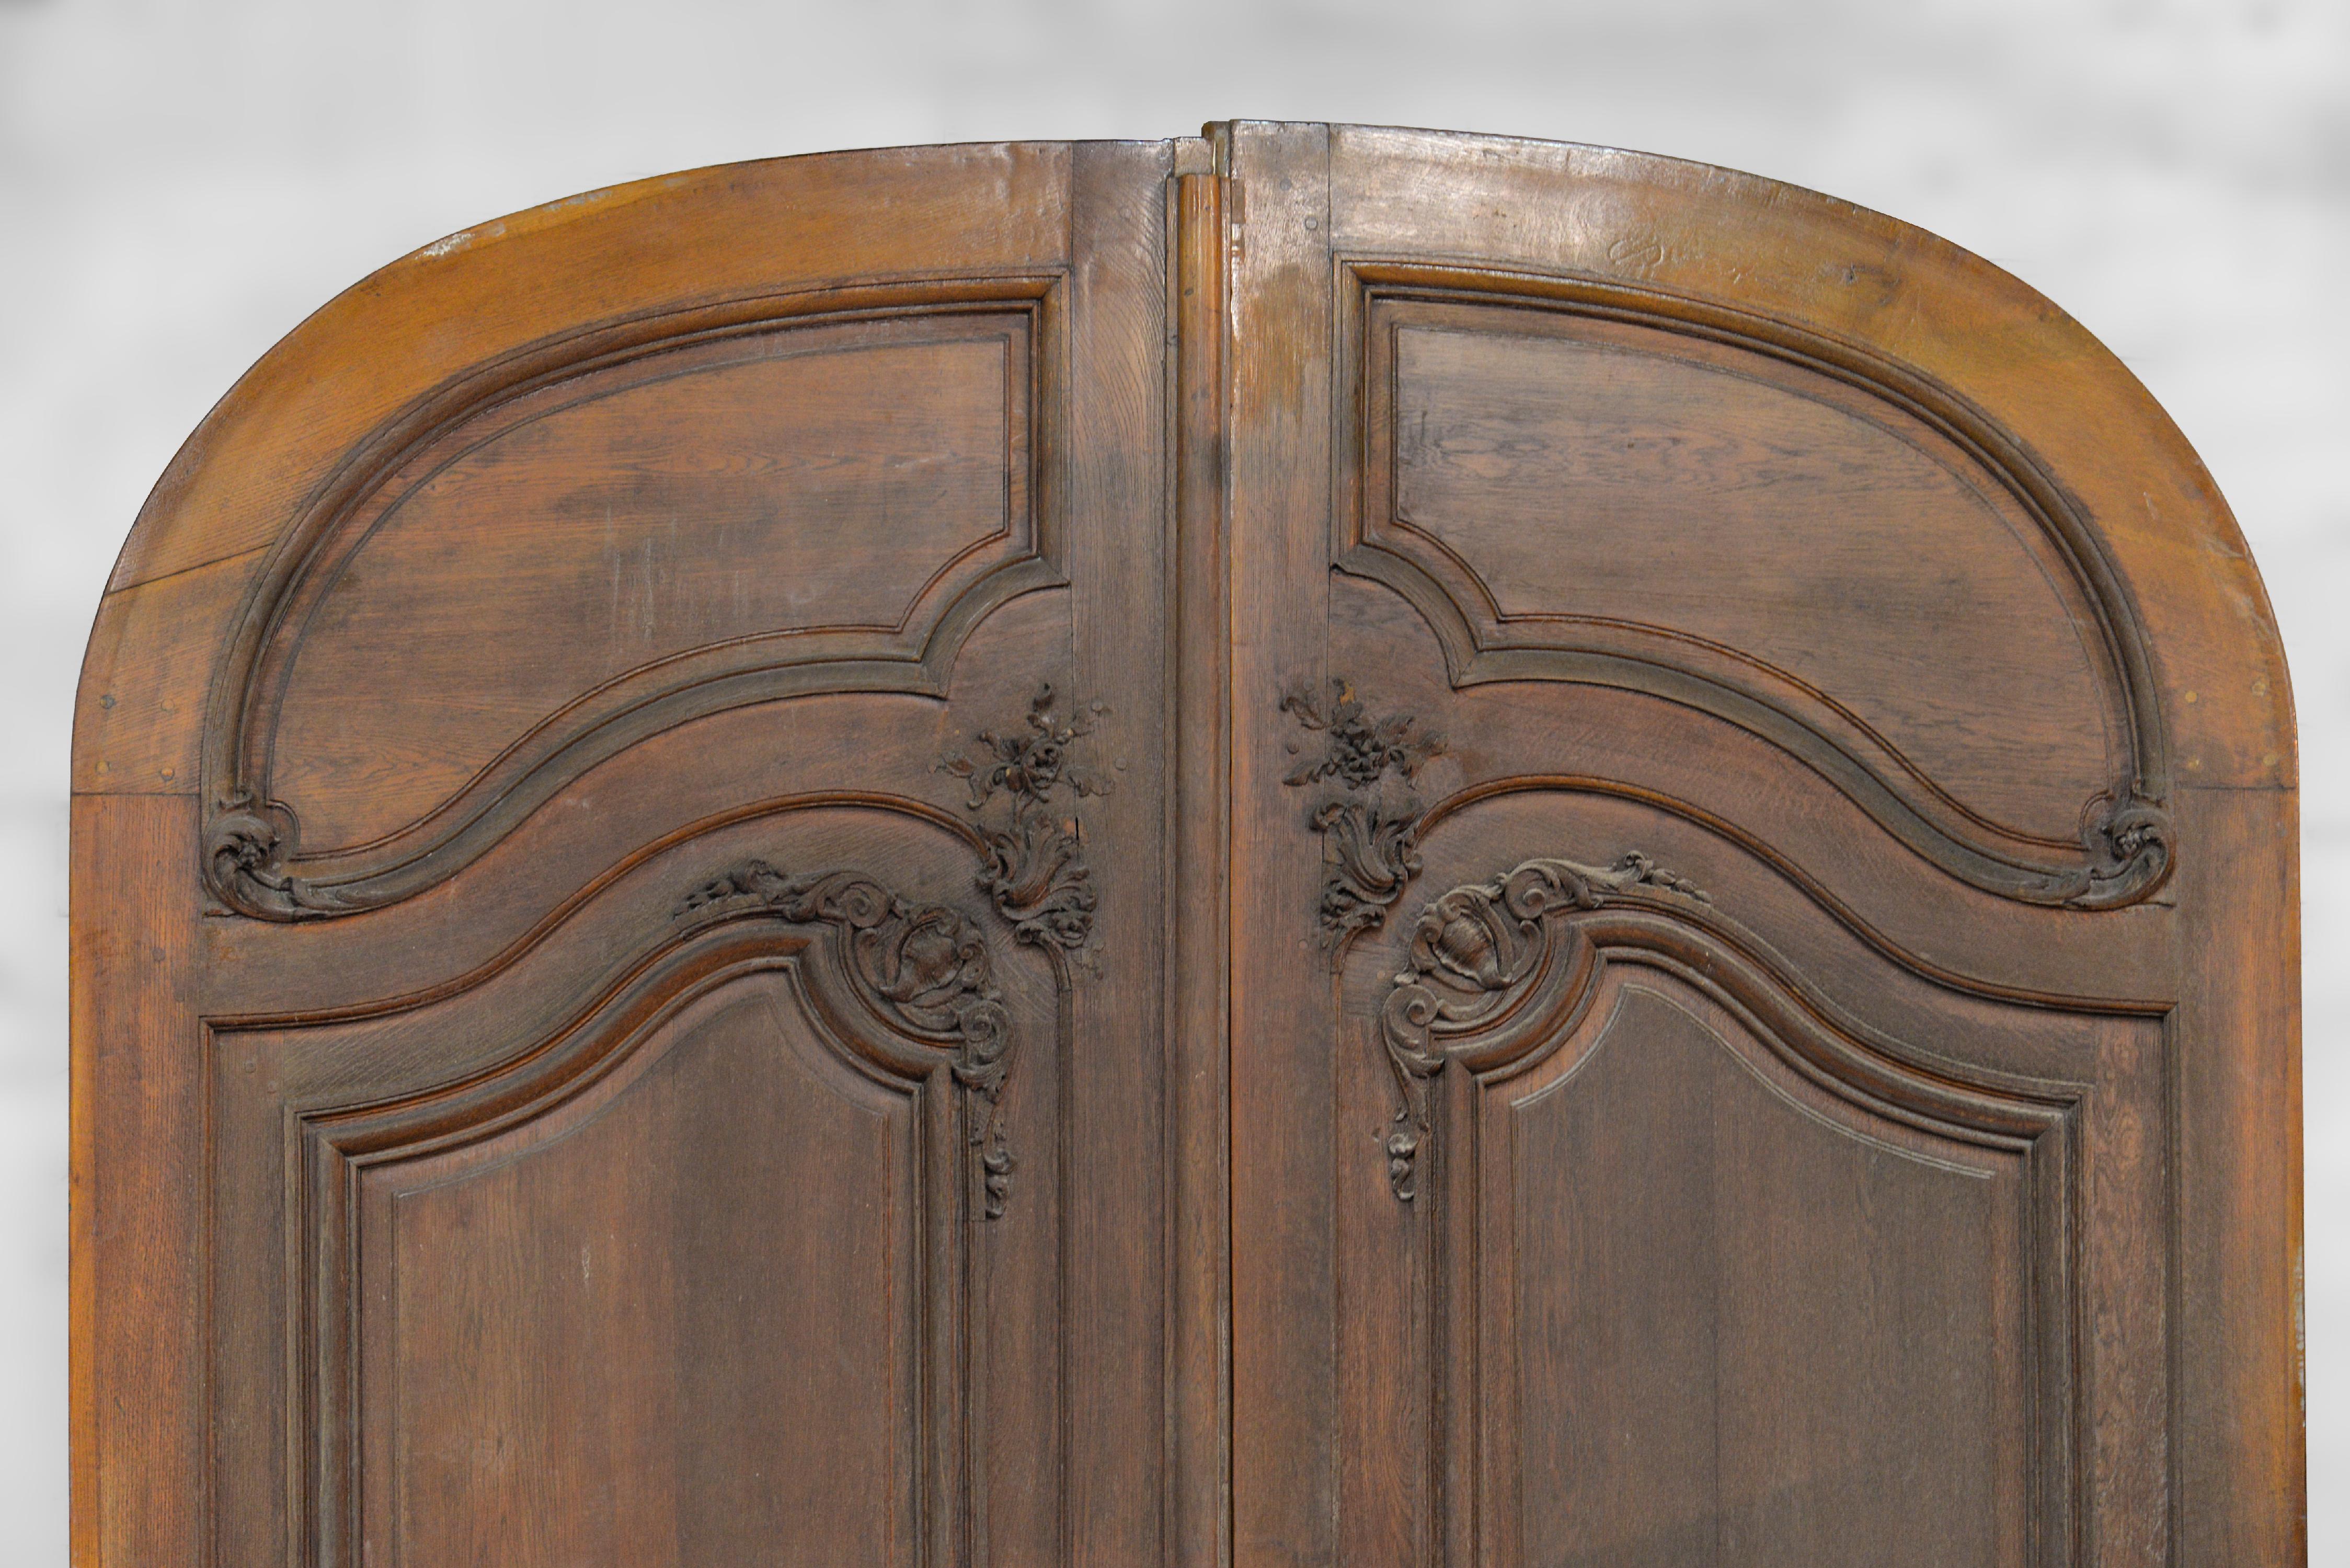 These high oak carriage doors were made at the end of the 19th century and belonged to a typical Haussmannian building in Paris. In very good condition, the details have been carefully executed. Fine moldings discreetly punctuate the structure, as